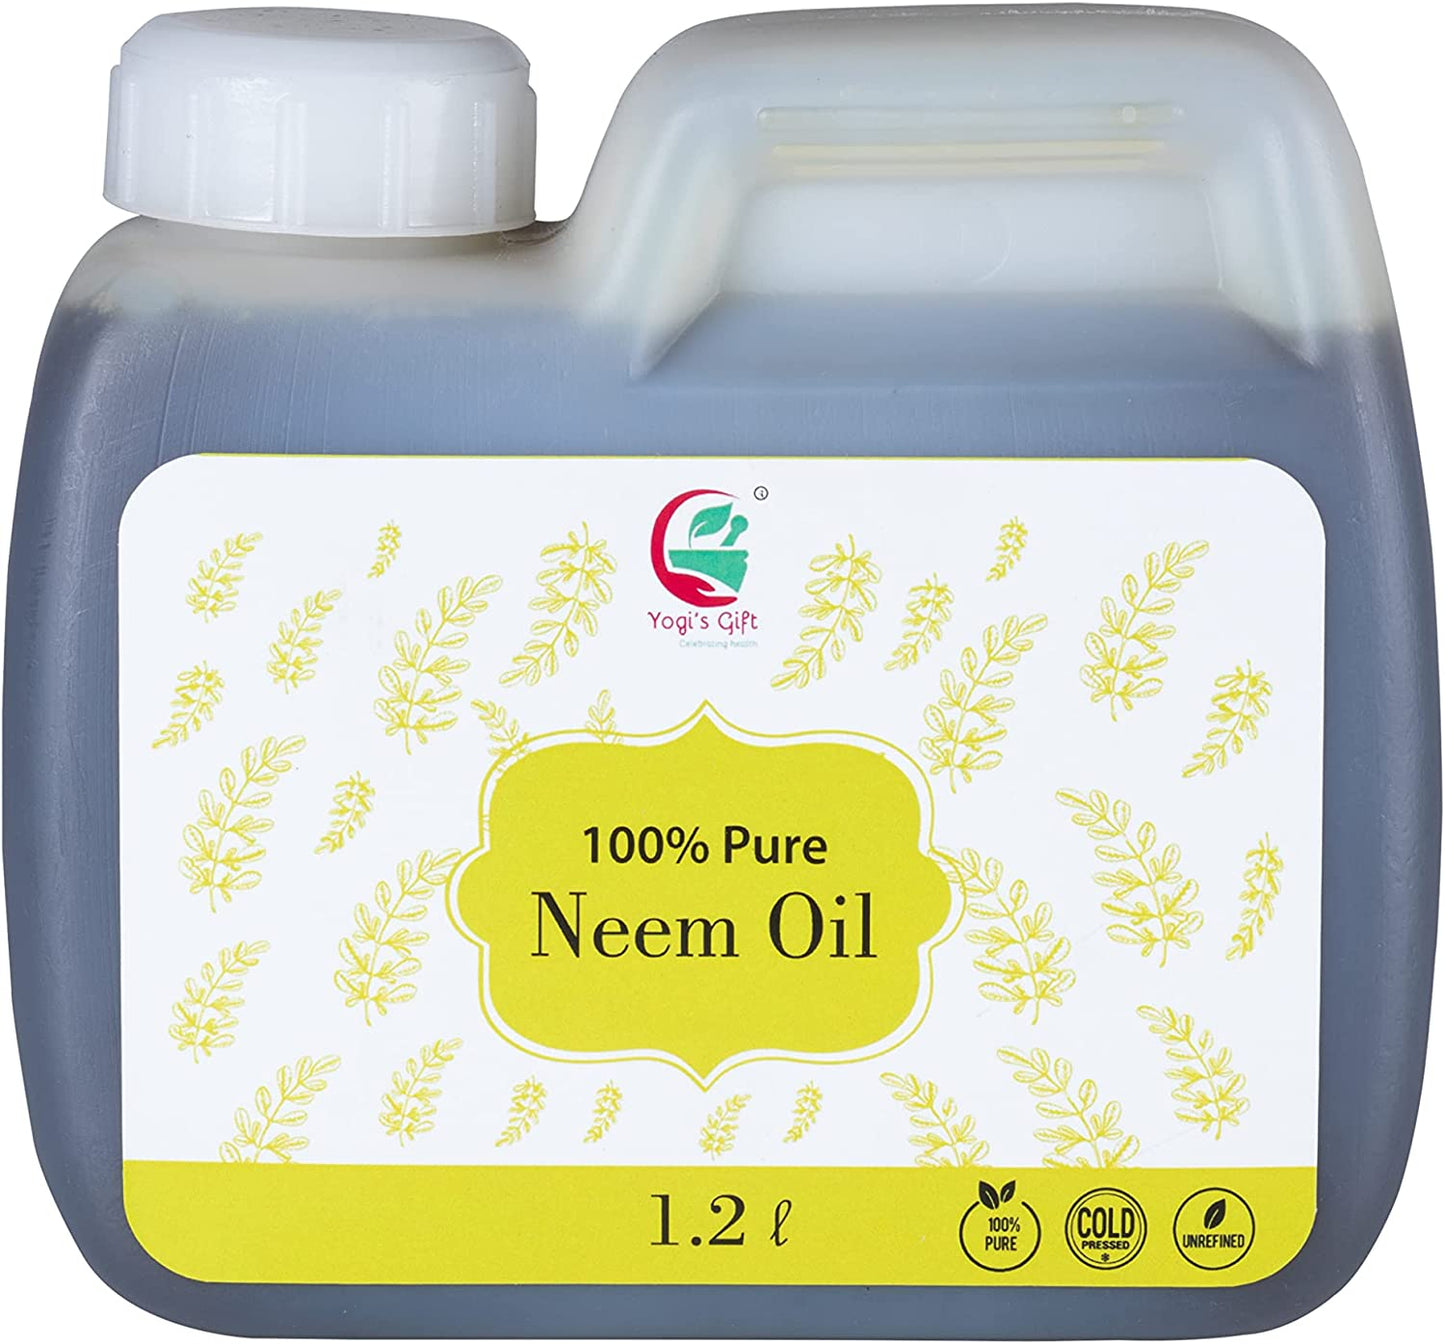 Neem oil 1.2 litre - Cold pressed, 100% Pure and Organic